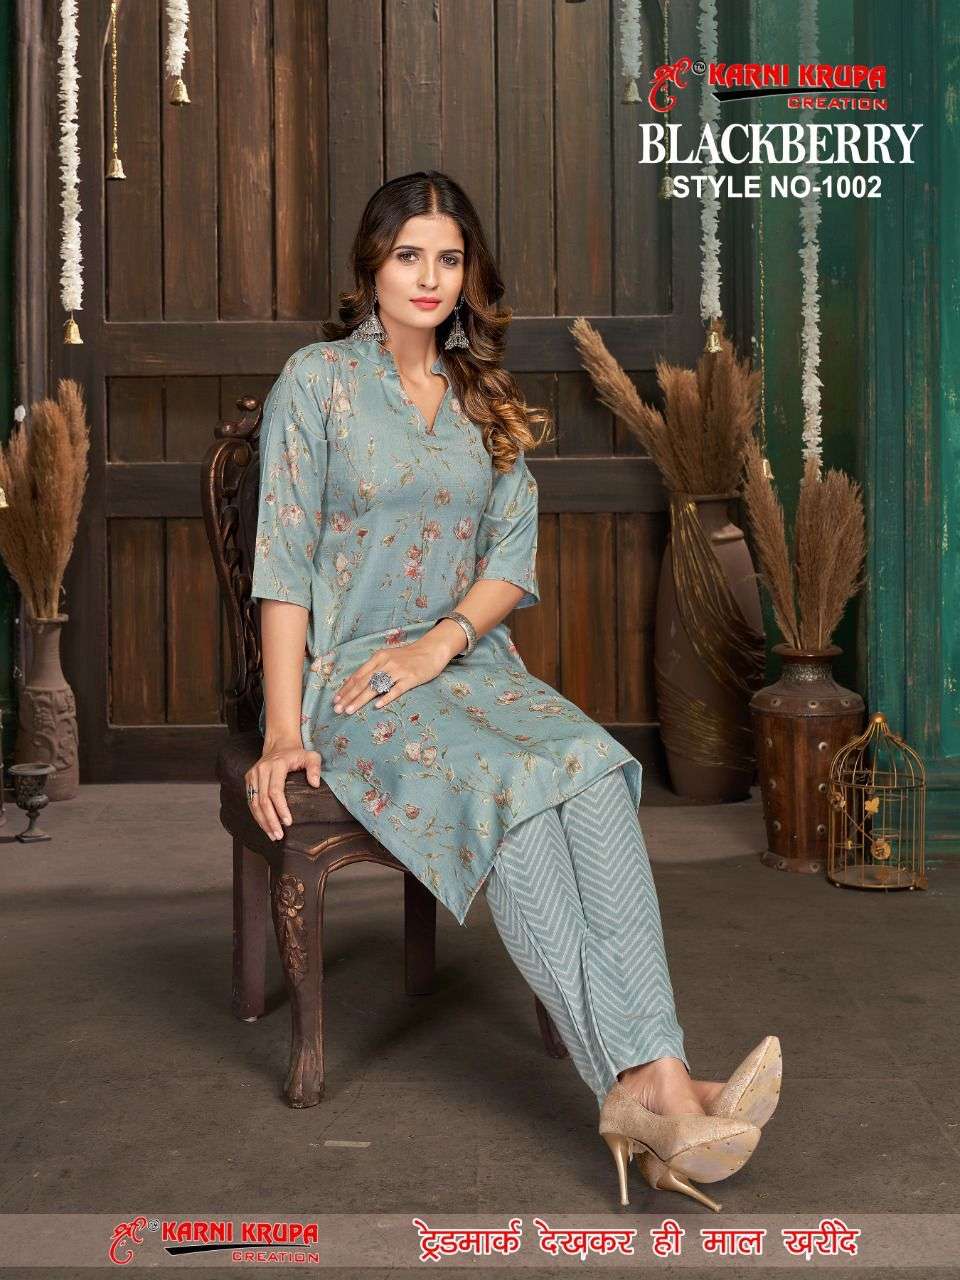 BLACKBERRY BY KARNI KRUPA CREATION 1001 TO 1004 SERIES DESIGNER STYLISH FANCY COLORFUL BEAUTIFUL PARTY WEAR & ETHNIC WEAR COLLECTION RAYON KURTIS WITH BOTTOM AT WHOLESALE PRICE